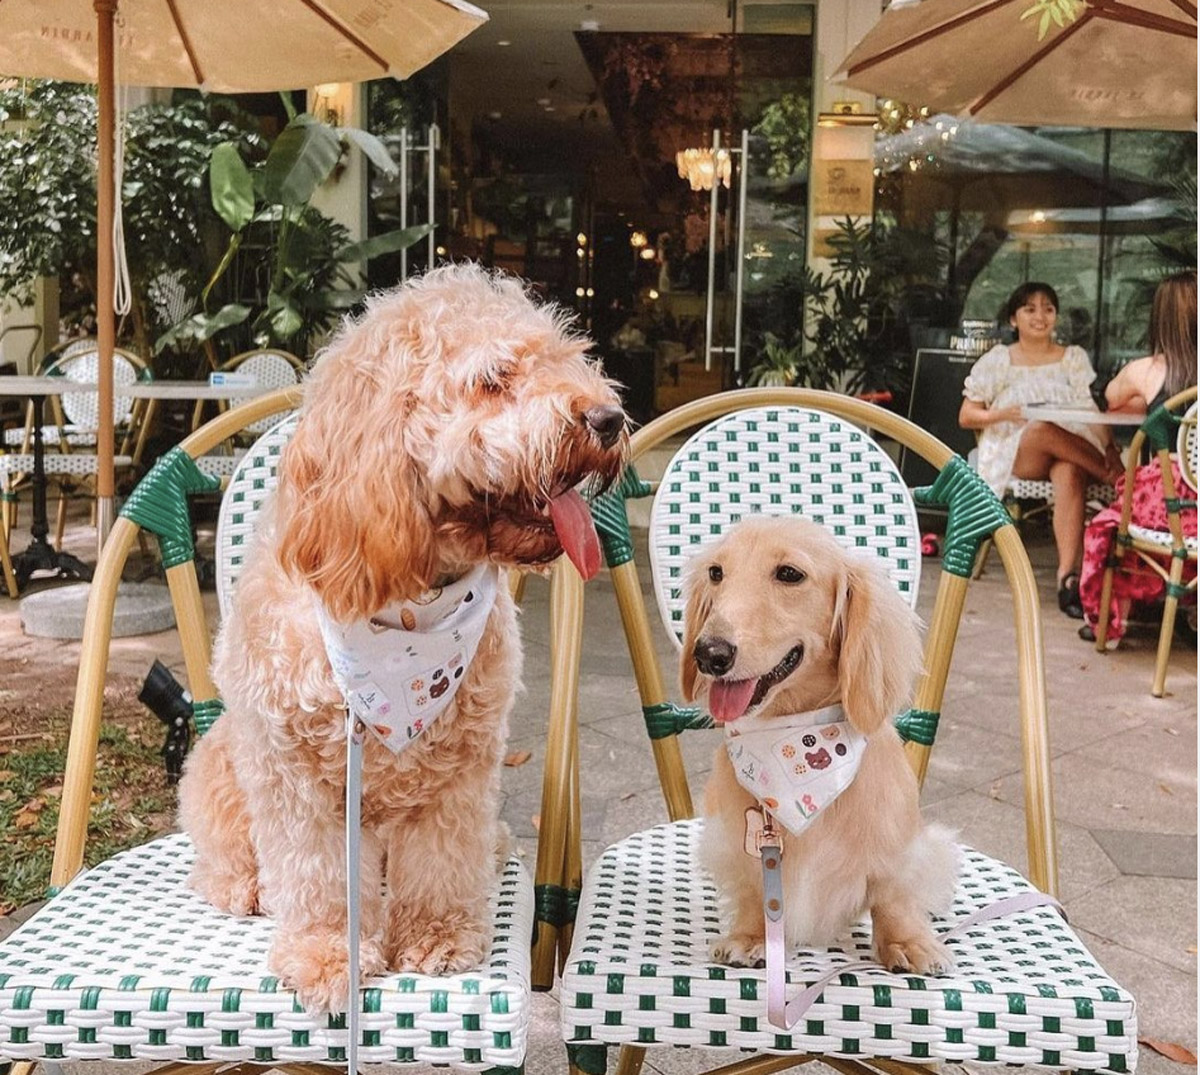 10 Wedding Venues That Welcome Pets with Open Arms